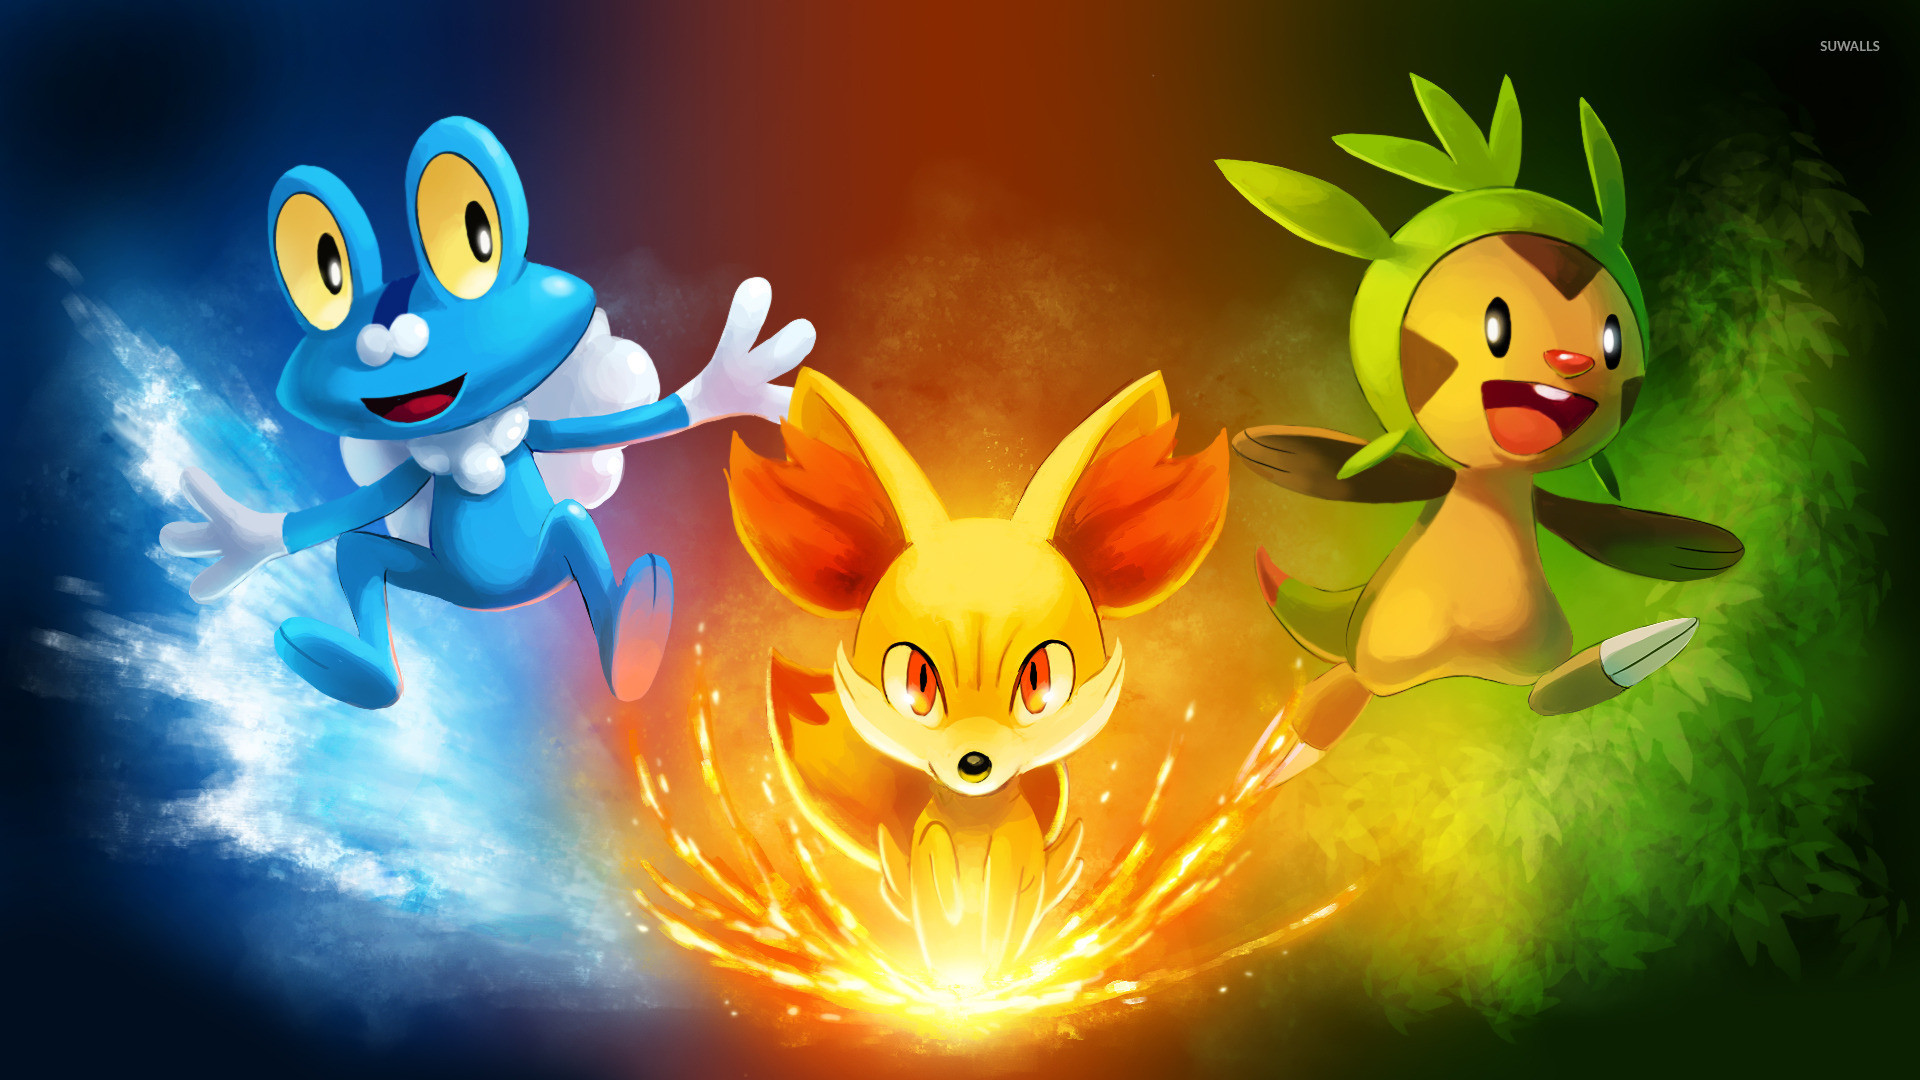 1920x1080 Pokemon X and Y wallpaper - Game wallpapers - #21692